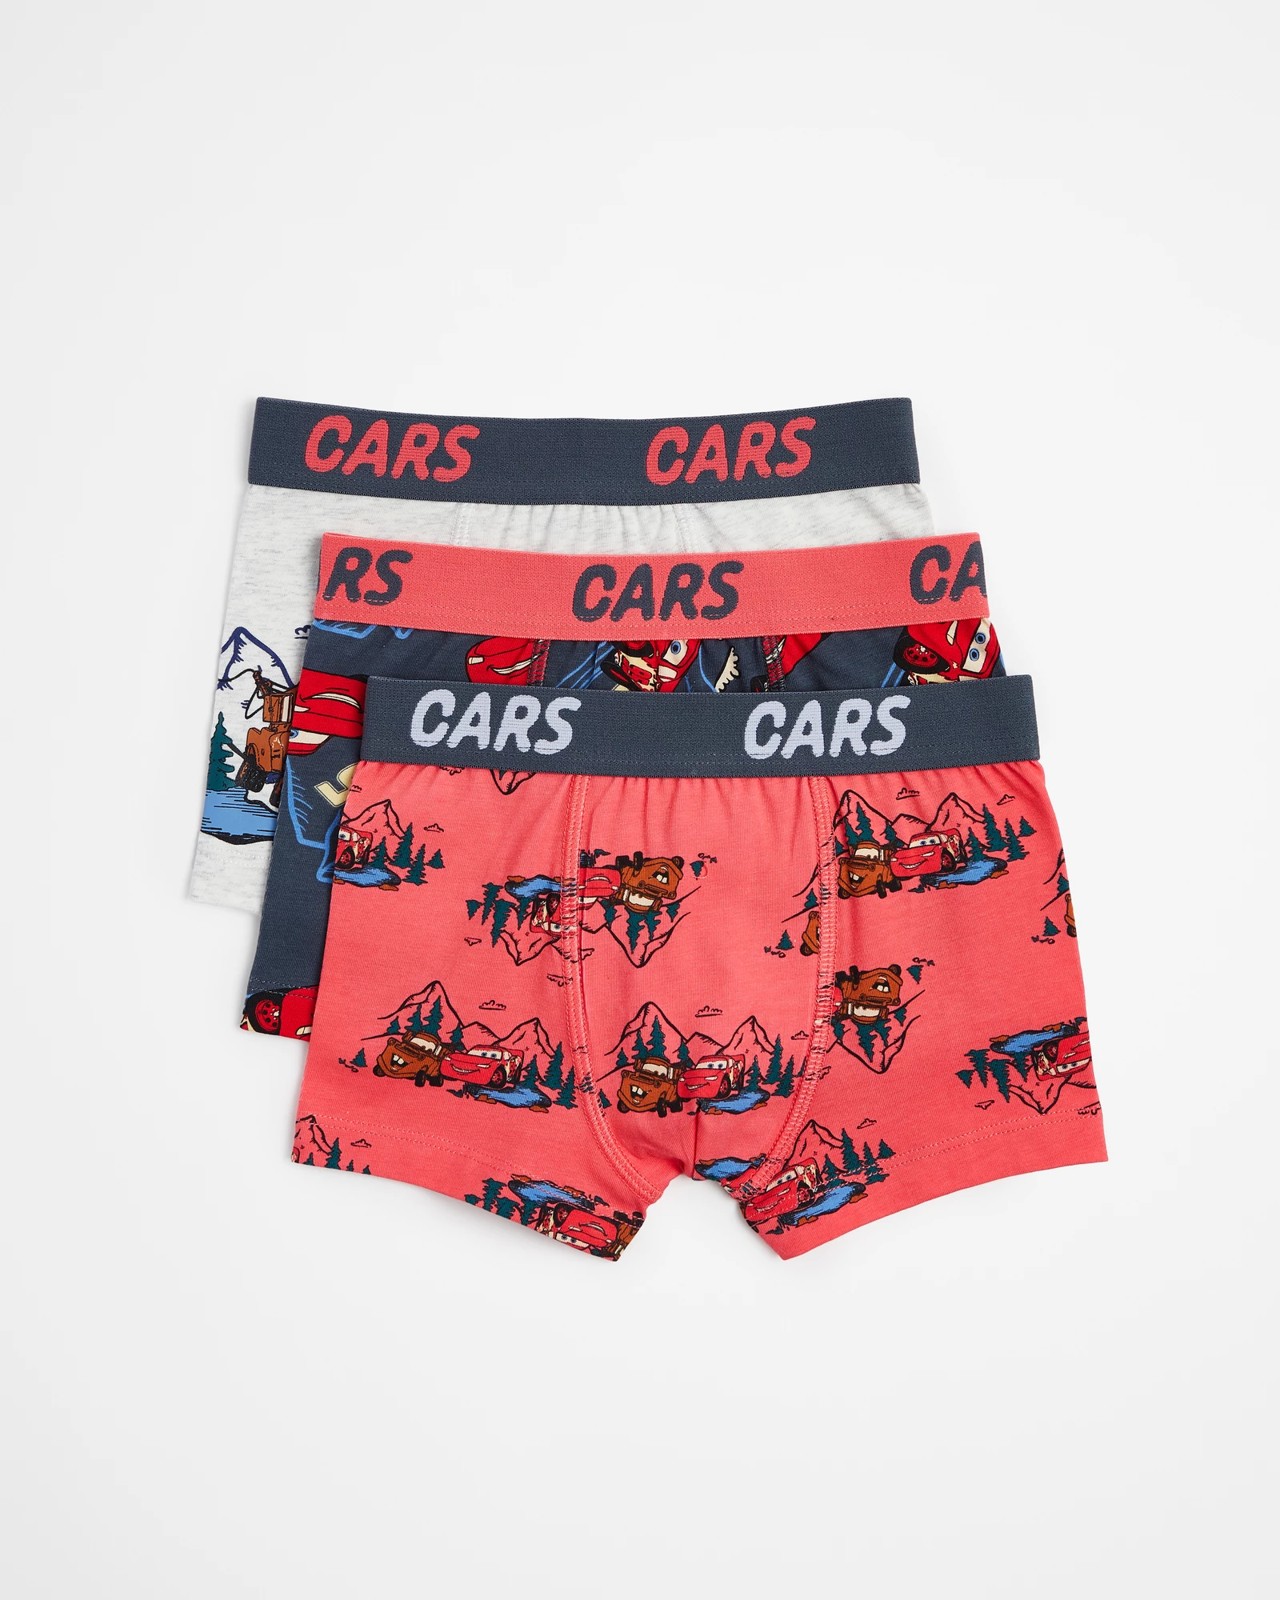 Luxury Sports Car Underwear With Cartoon 2D Elements For Men High Quality  Boxer Target Mens Briefs In Custom Large Sizes From Redbud01, $12.12